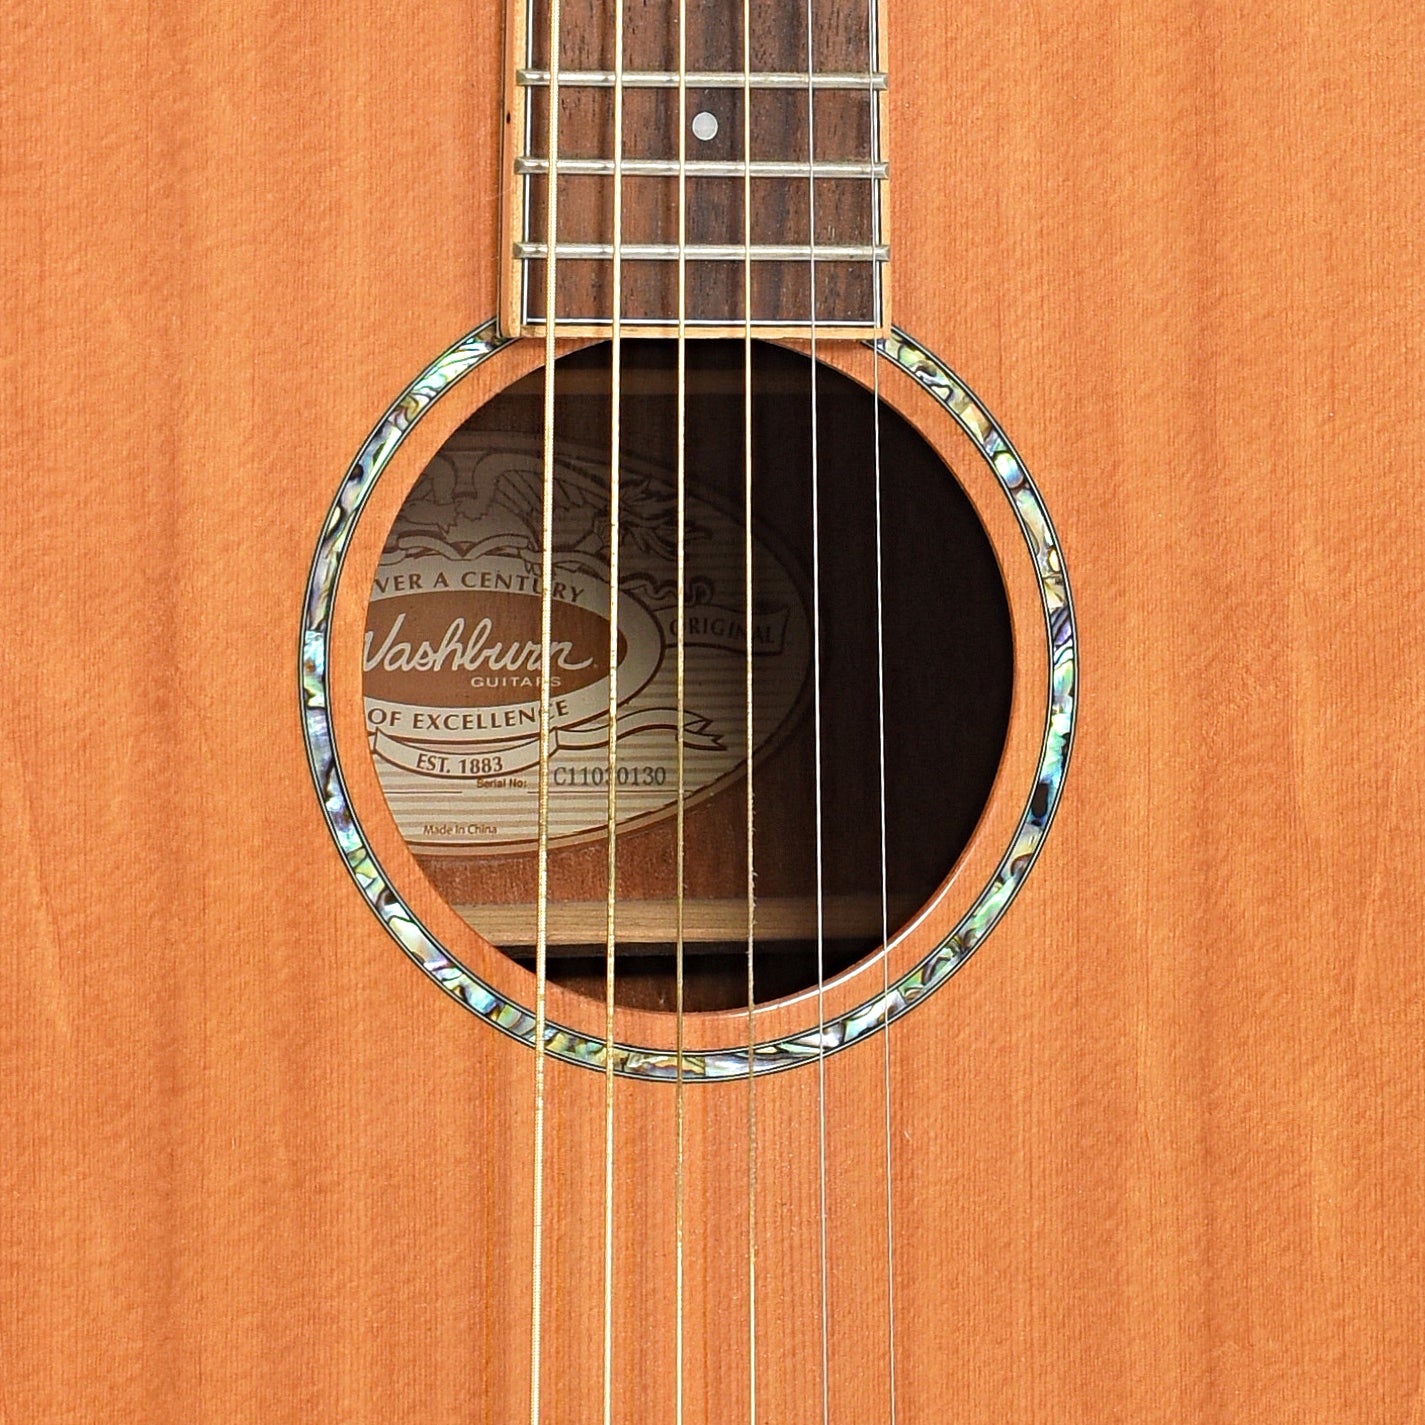 Sound hole of Washburn WD15S Acoustic Guitar (2011)